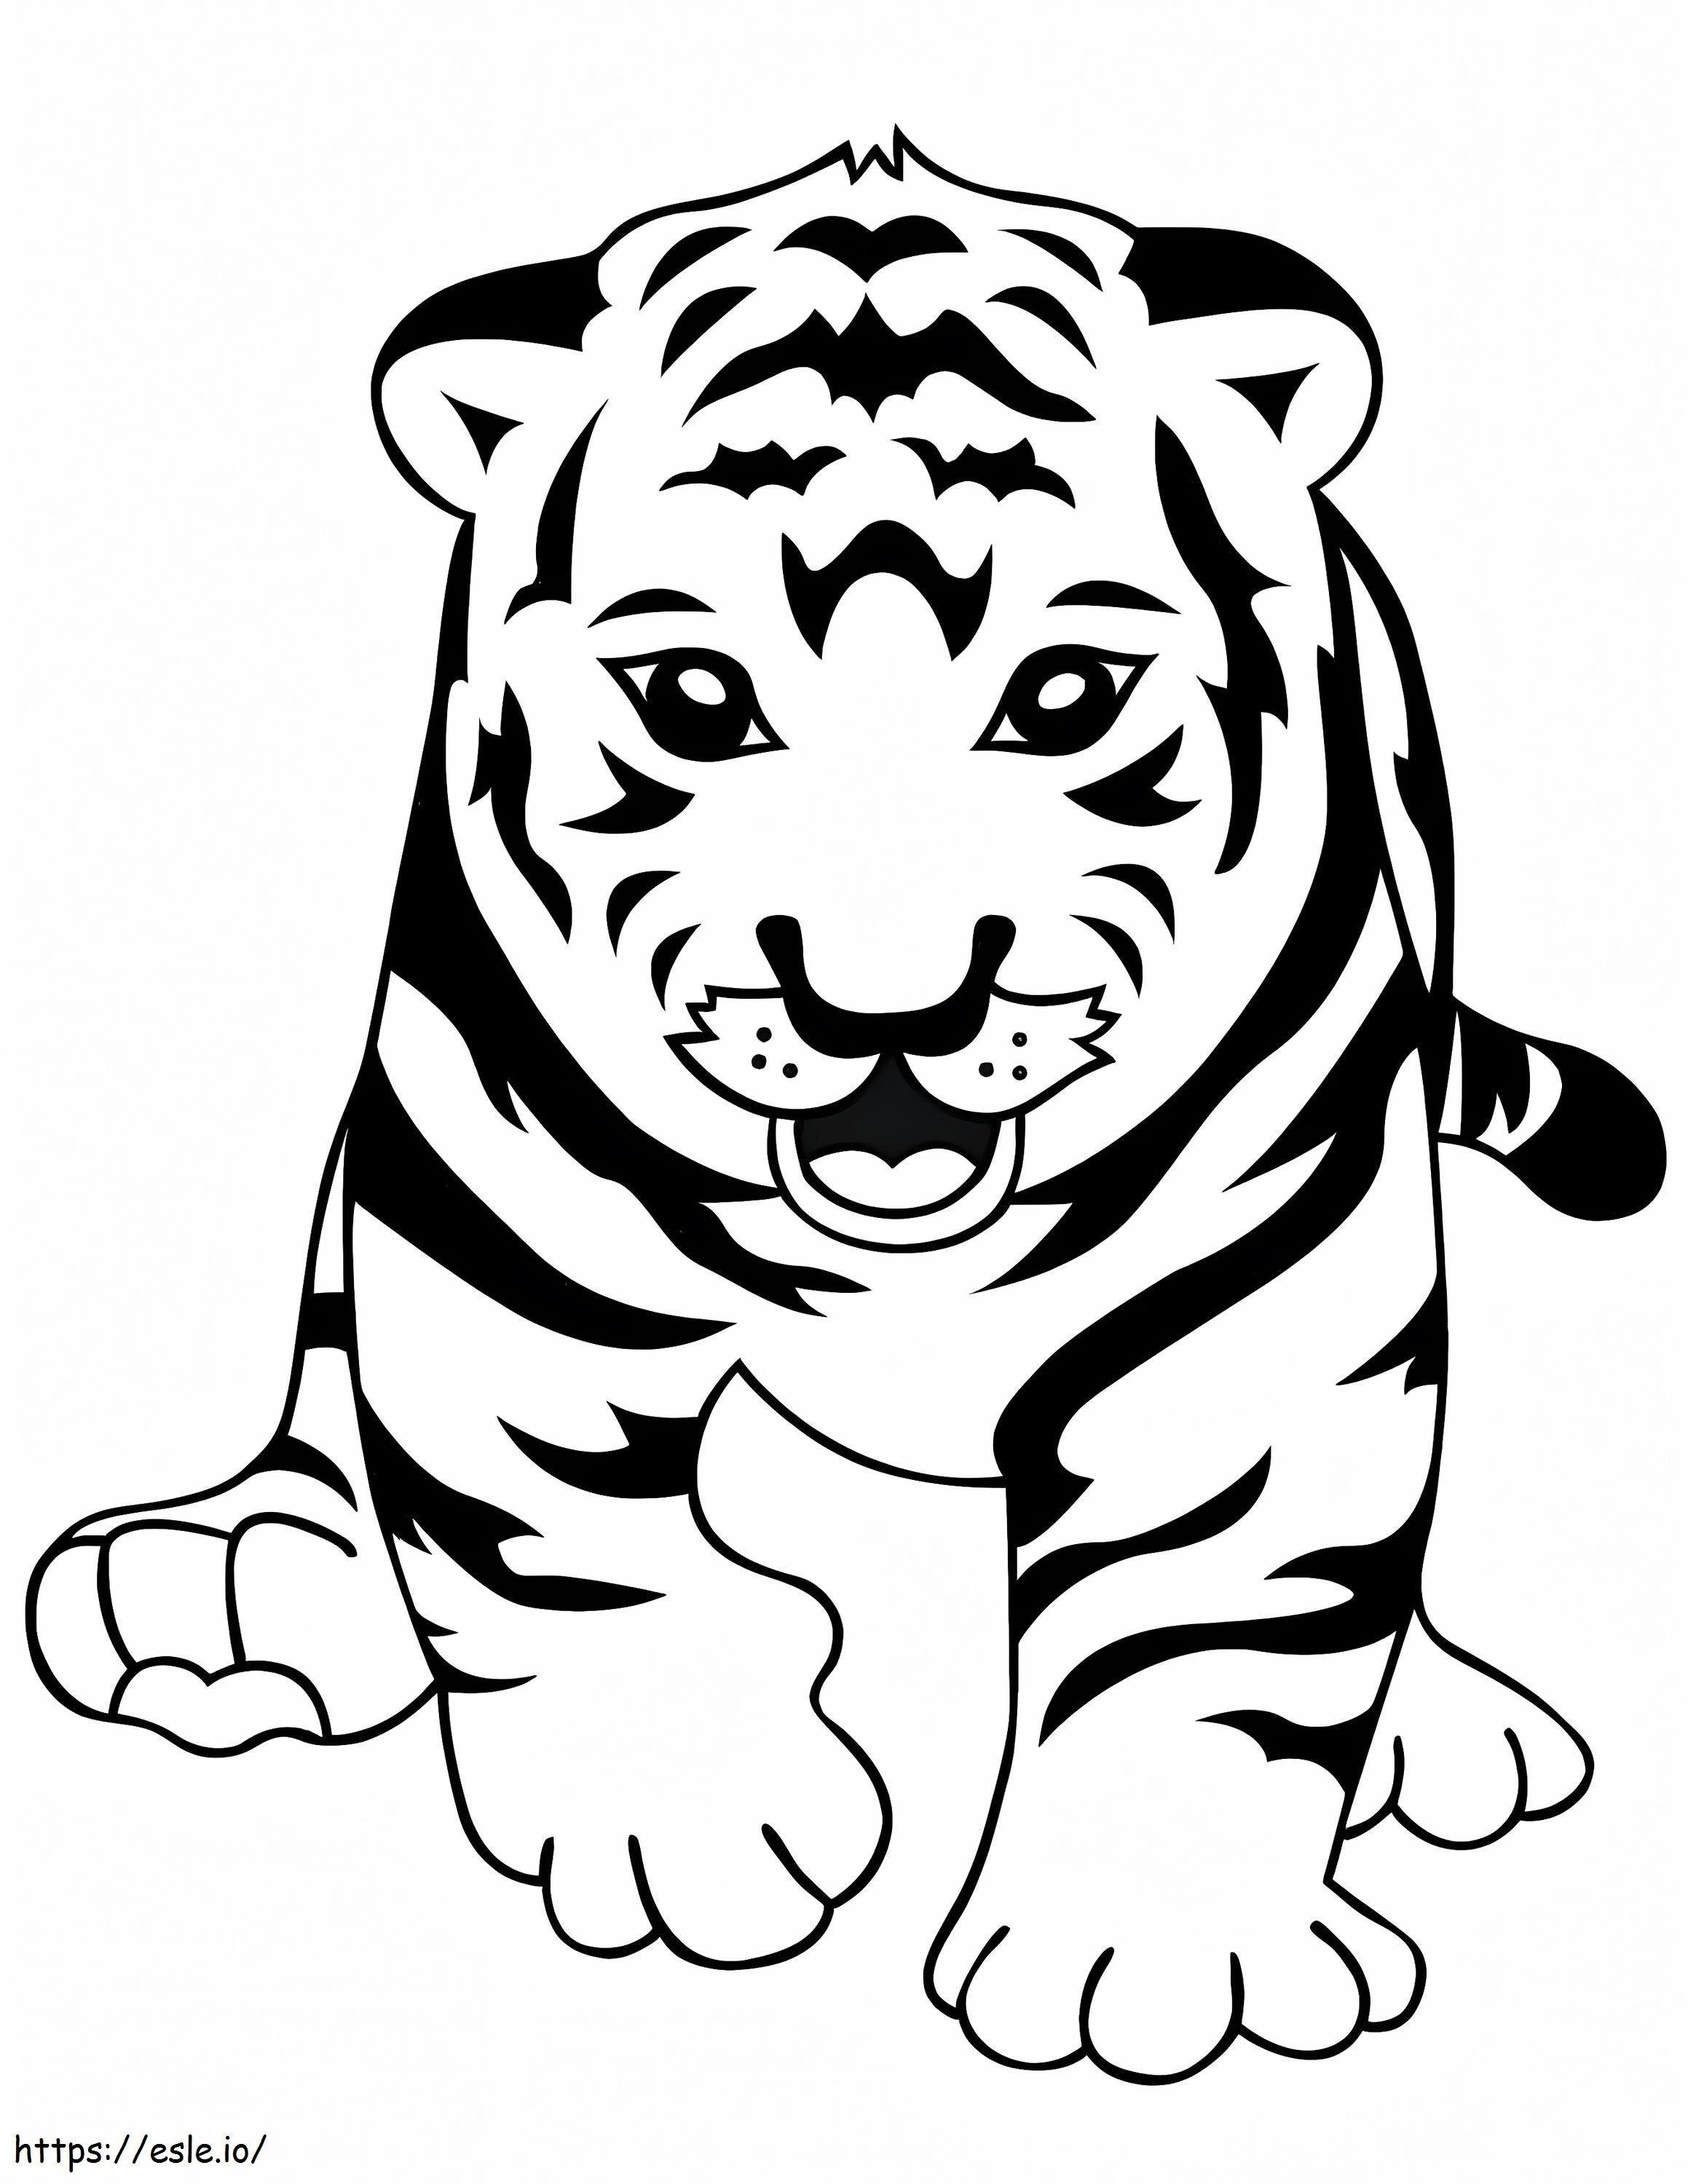 A Little Tiger coloring page